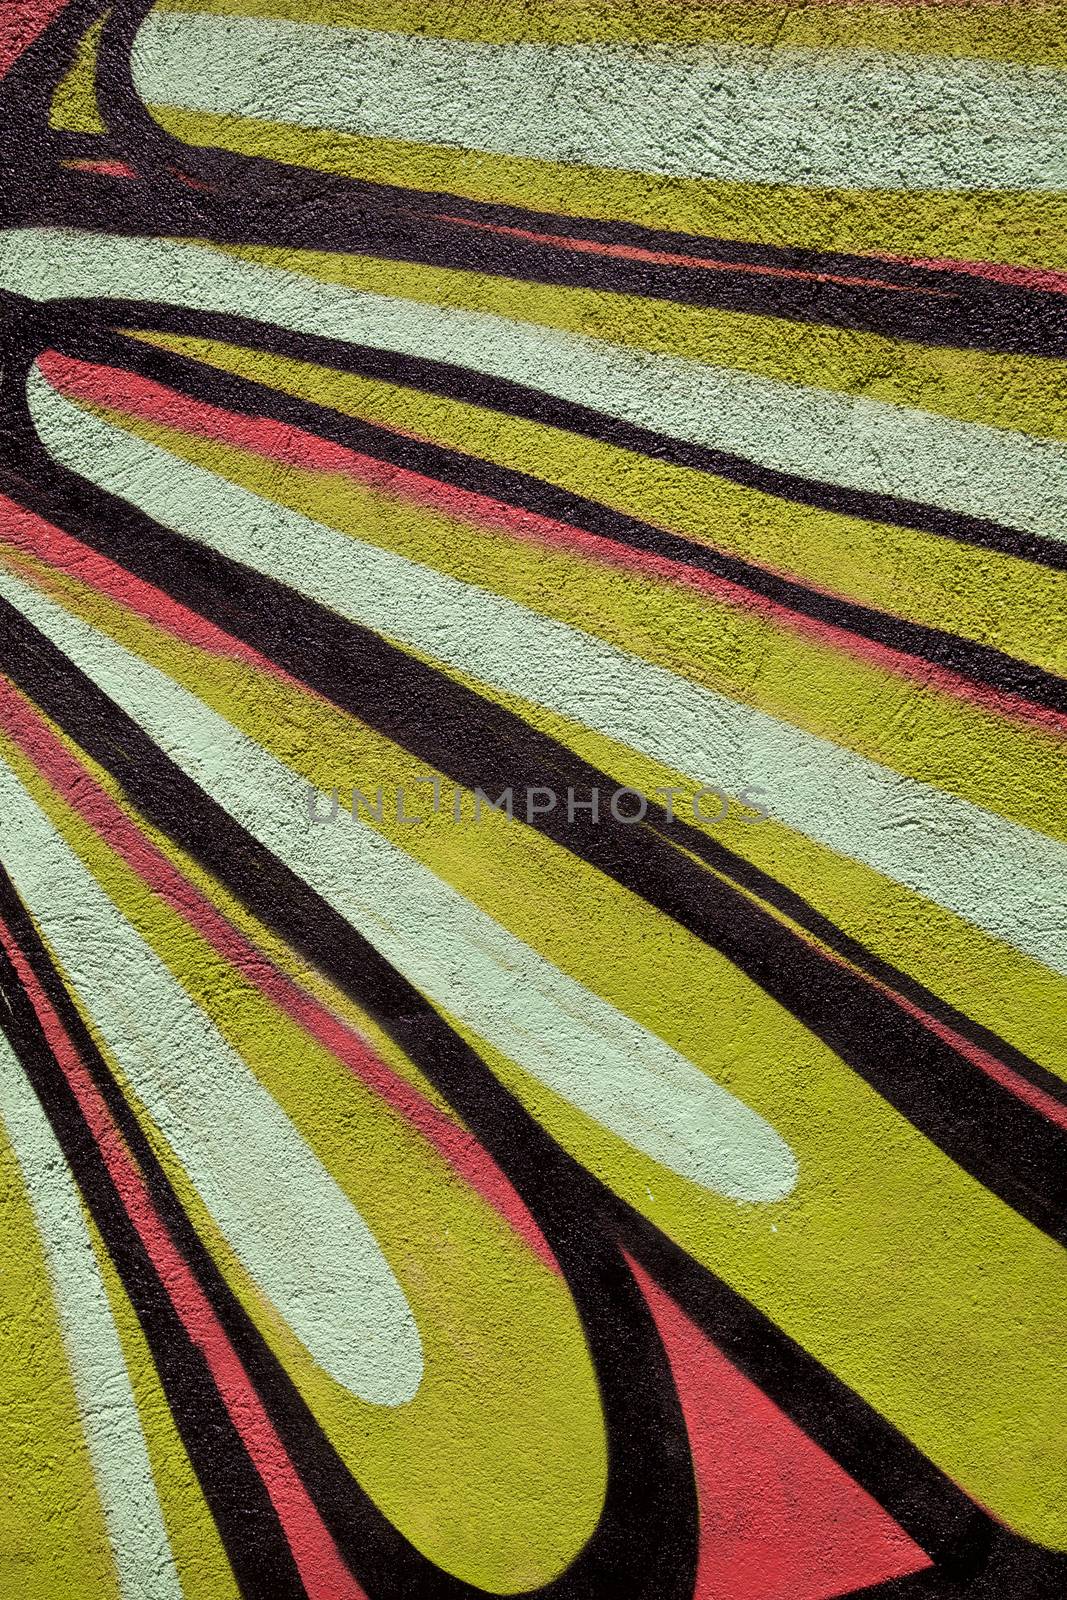 Abstract colorful graffiti design in New York City, USA